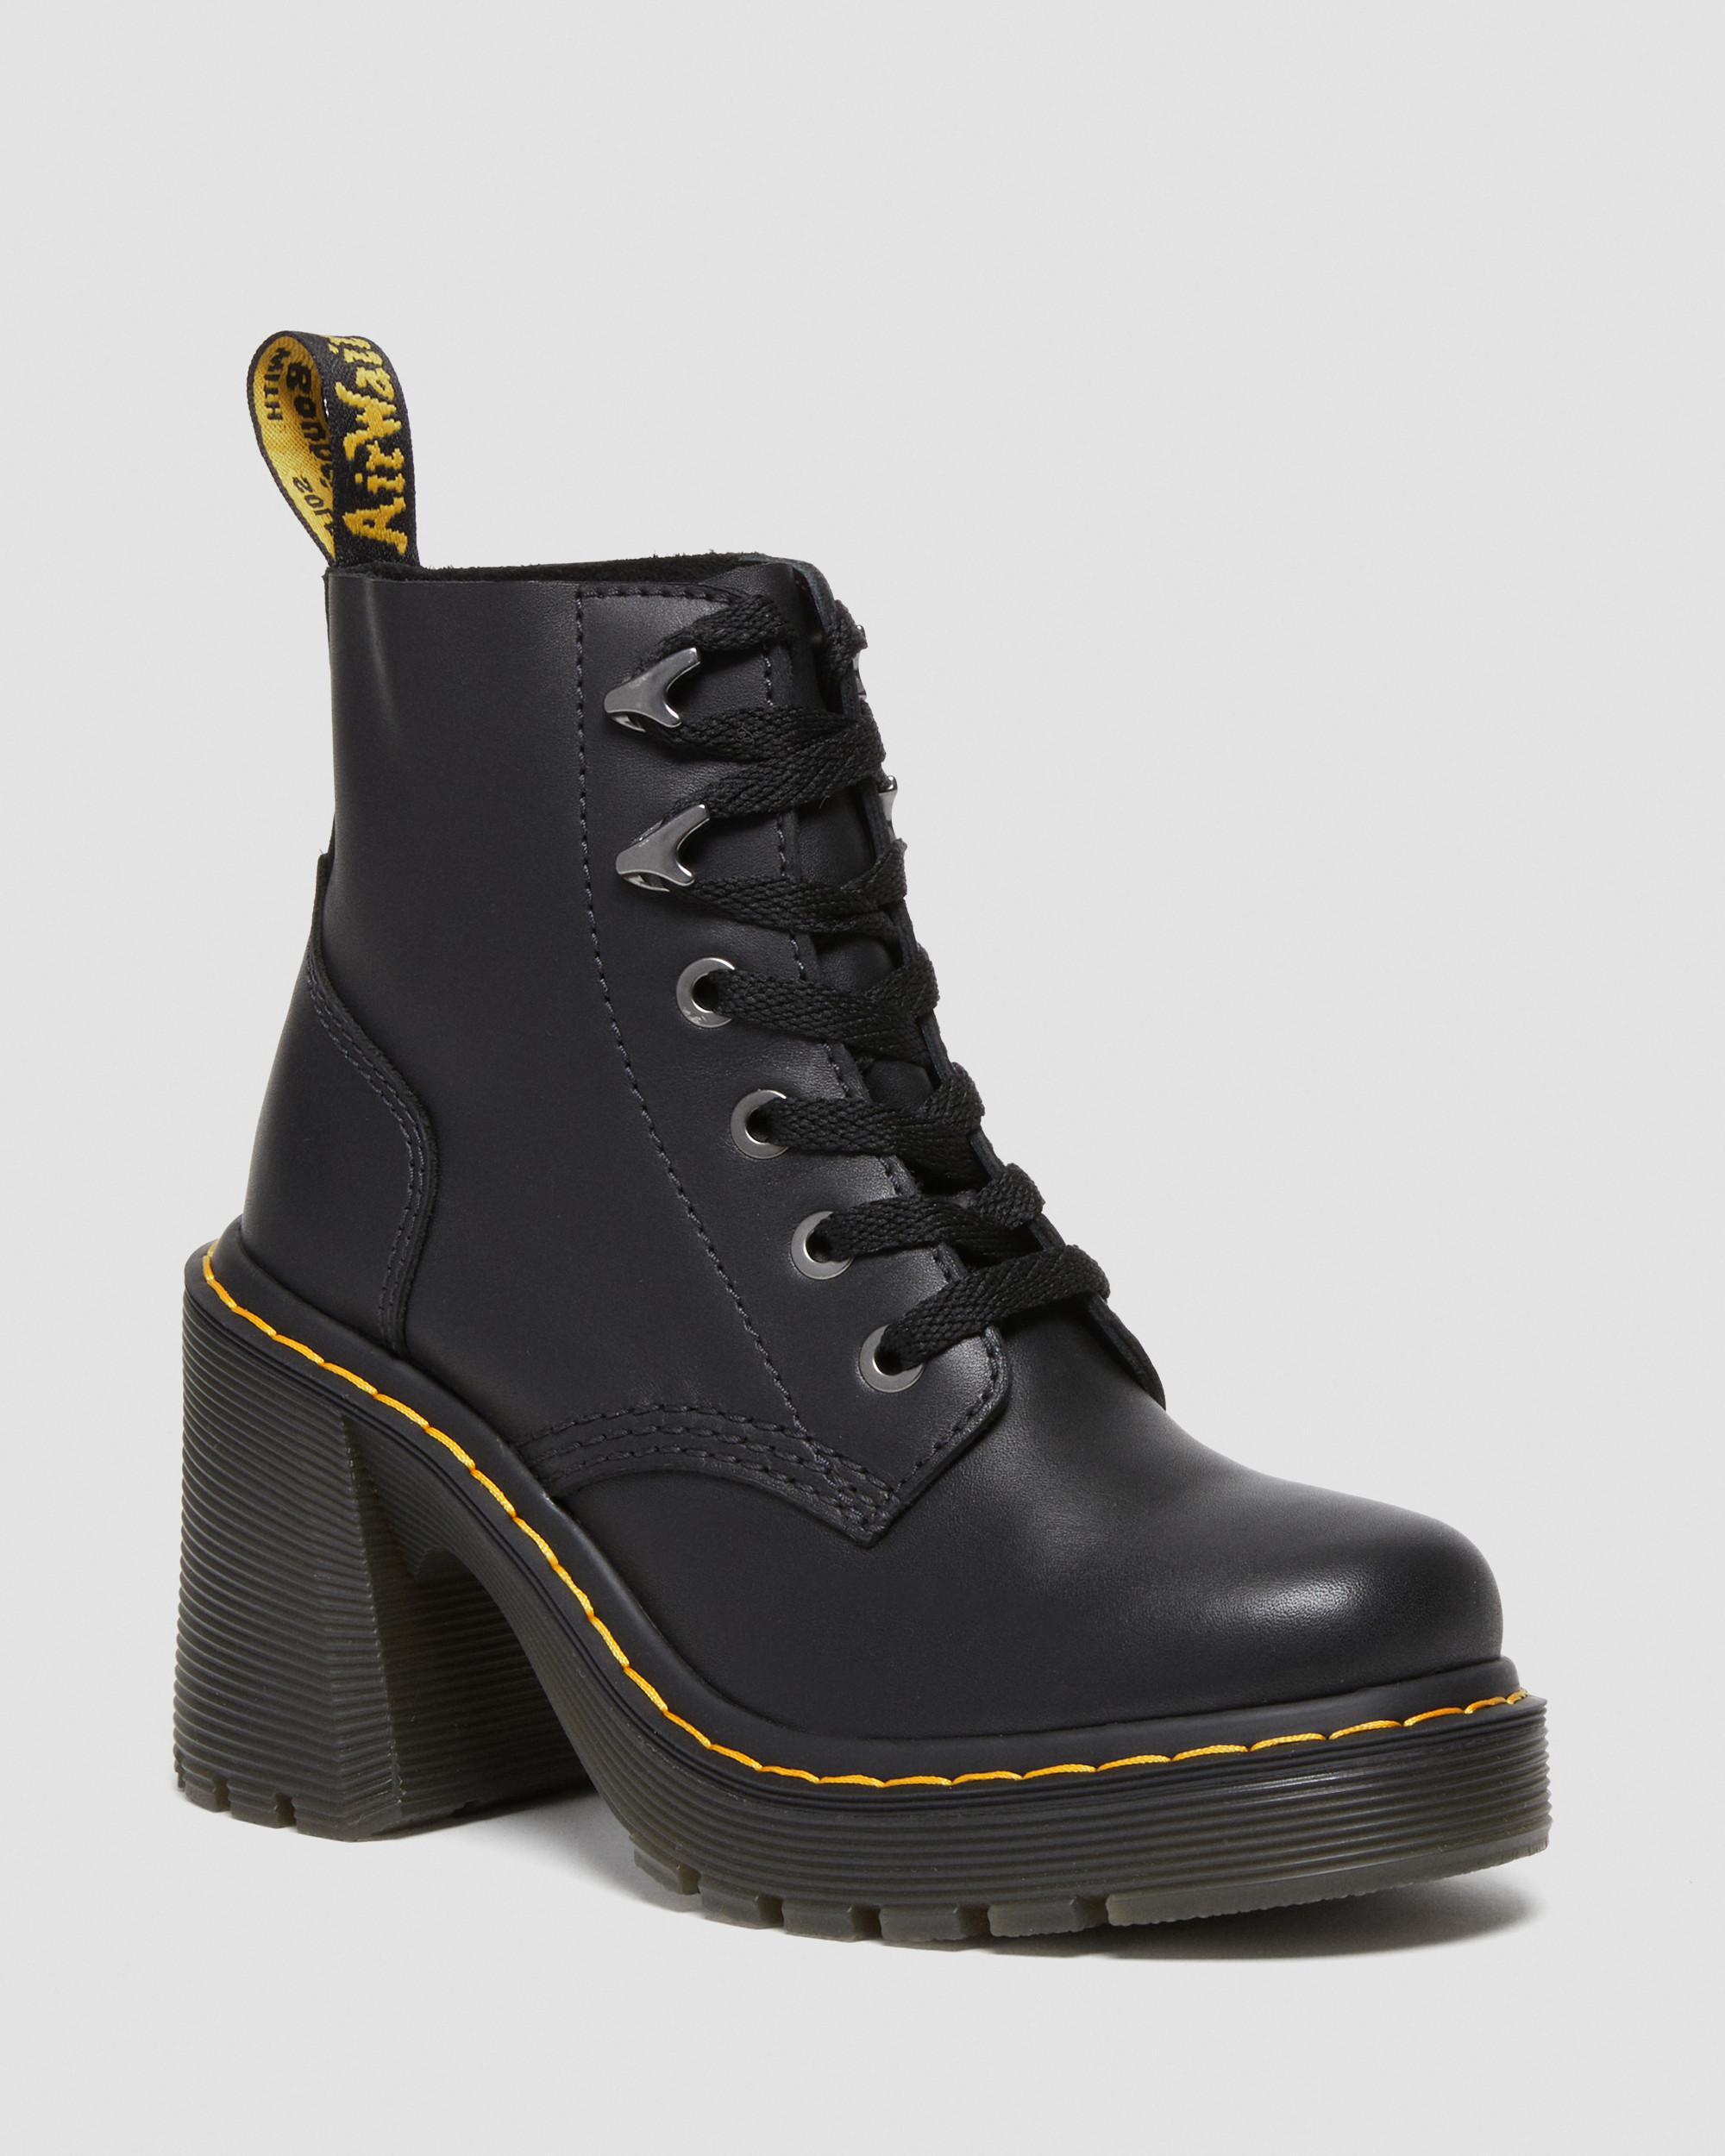 DR MARTENS Jesy Sendal Leather Lace Up Flared Heel Boots